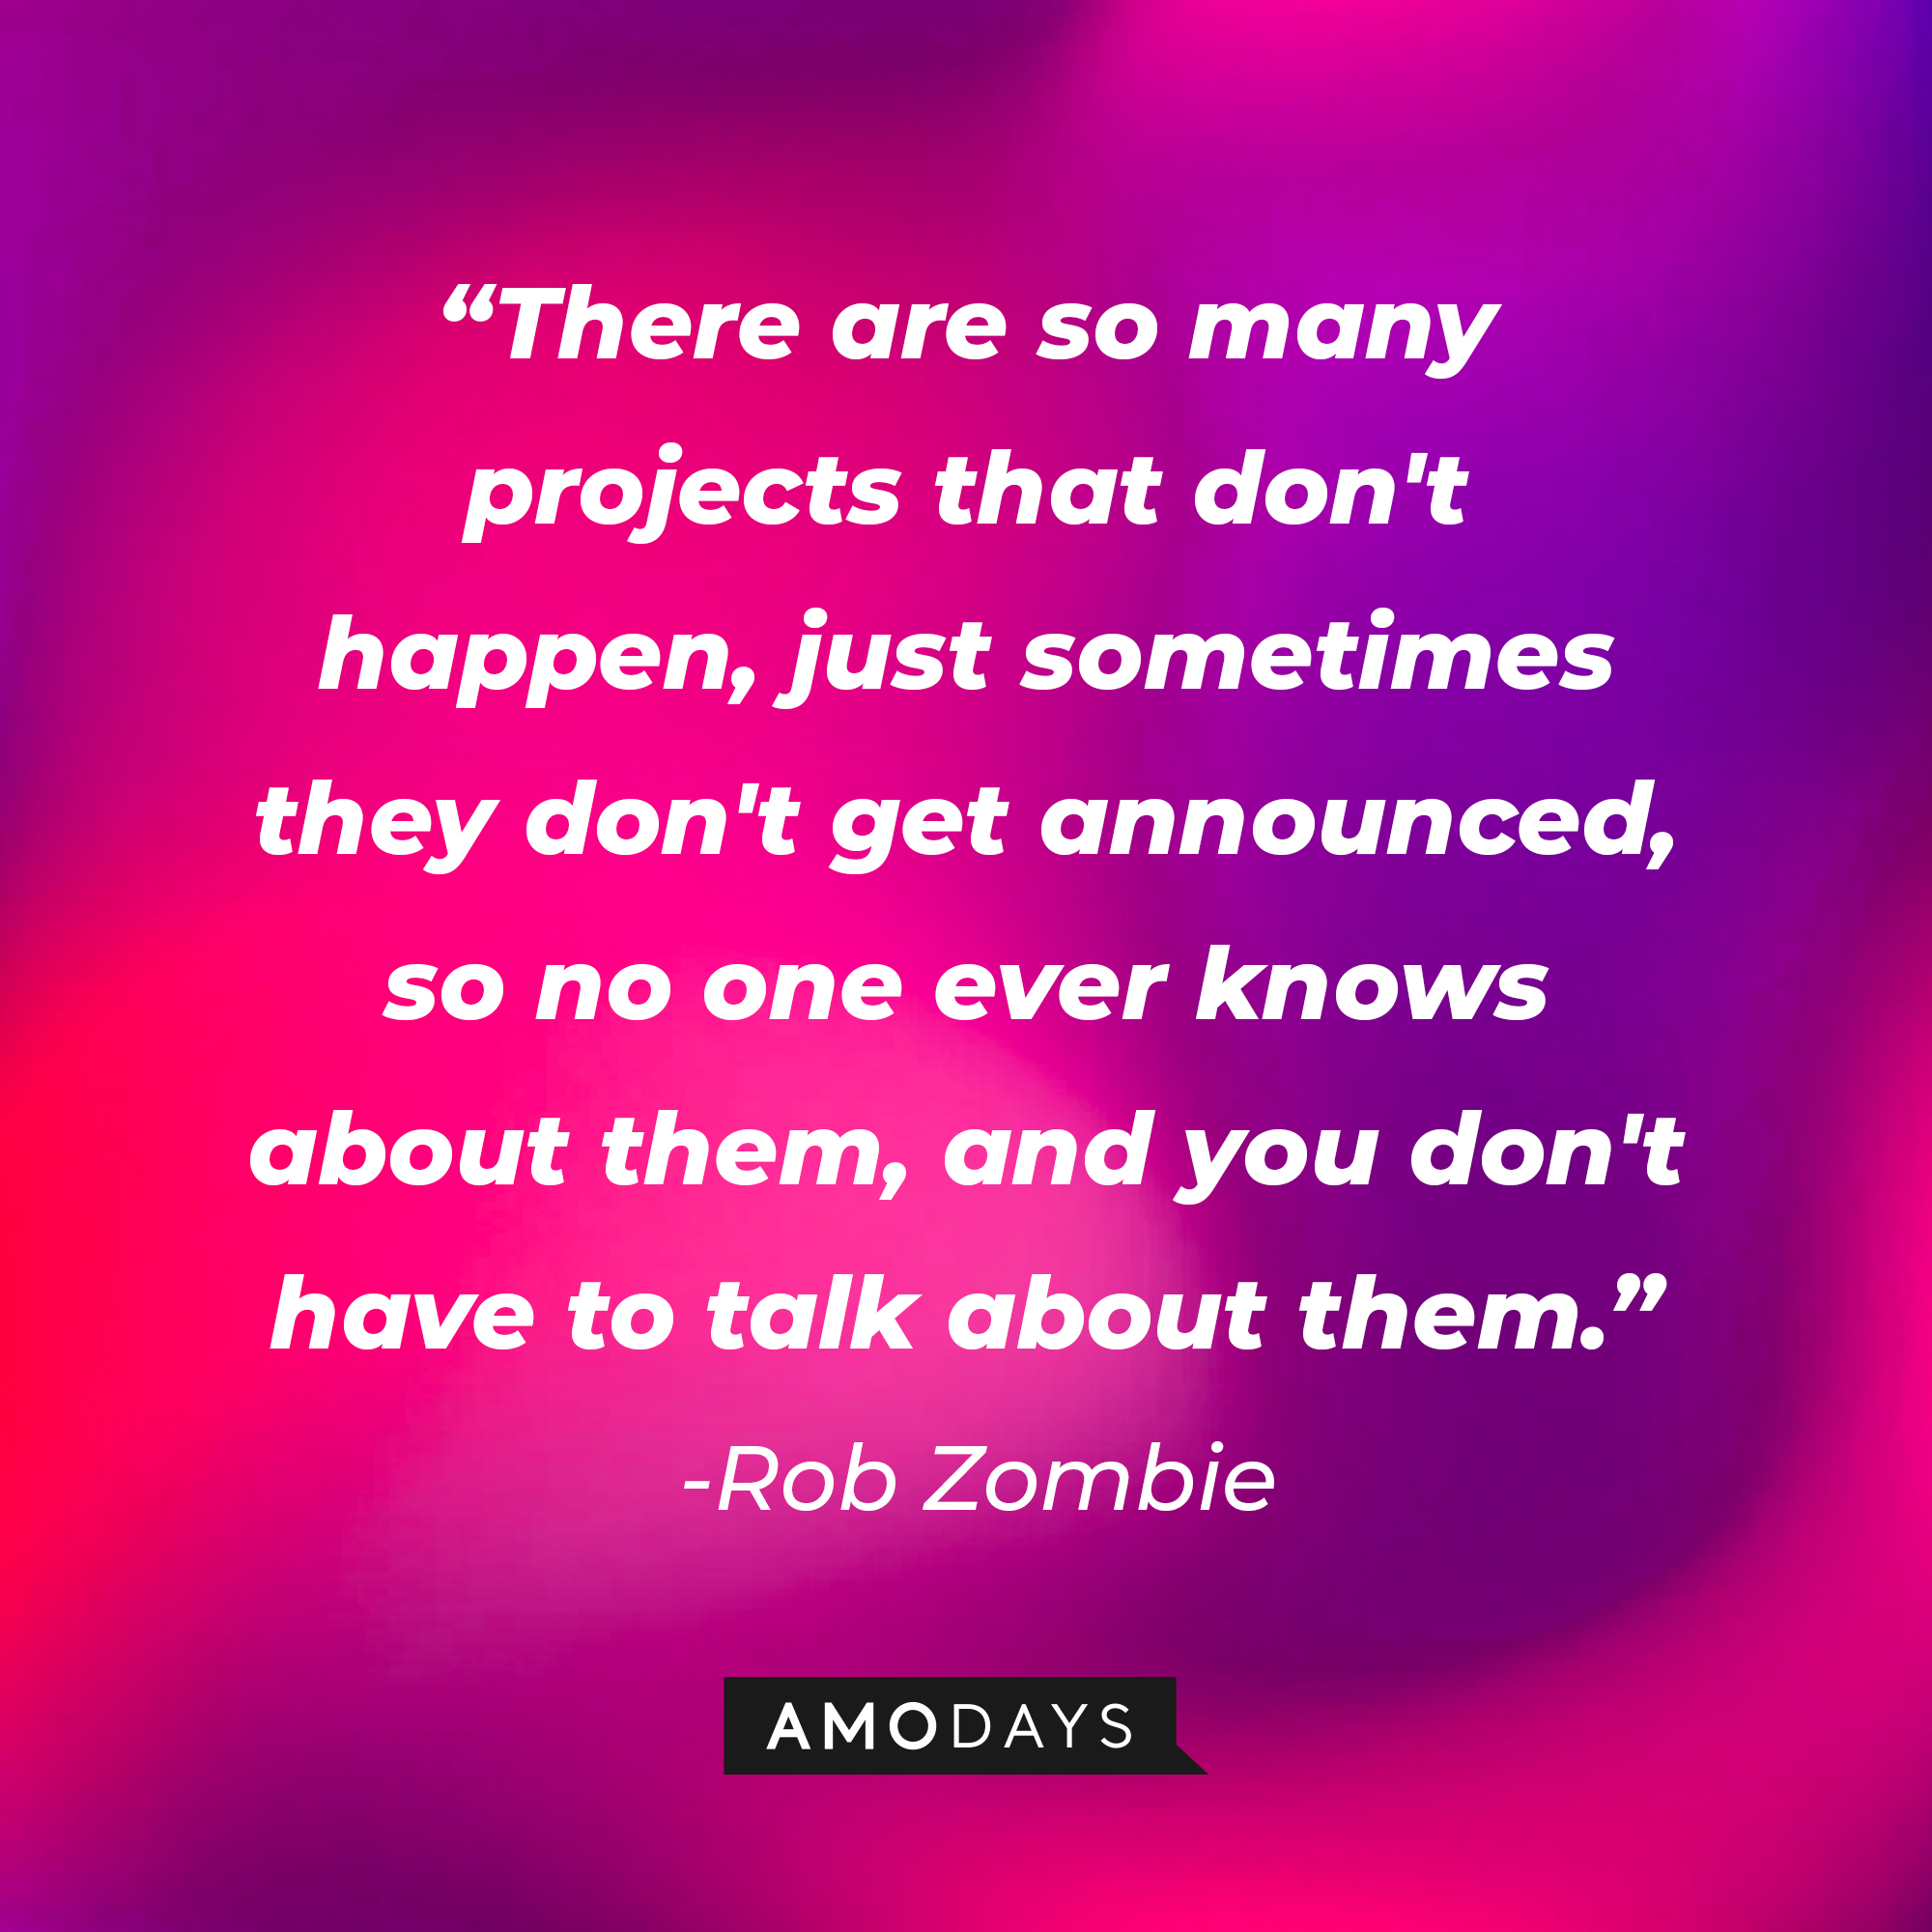 Rob Zombie's quote "There are so many projects that don't happen, just sometimes they don't get announced, so no one ever knows about them, and you don't have to talk about them." | Source: AmoDays